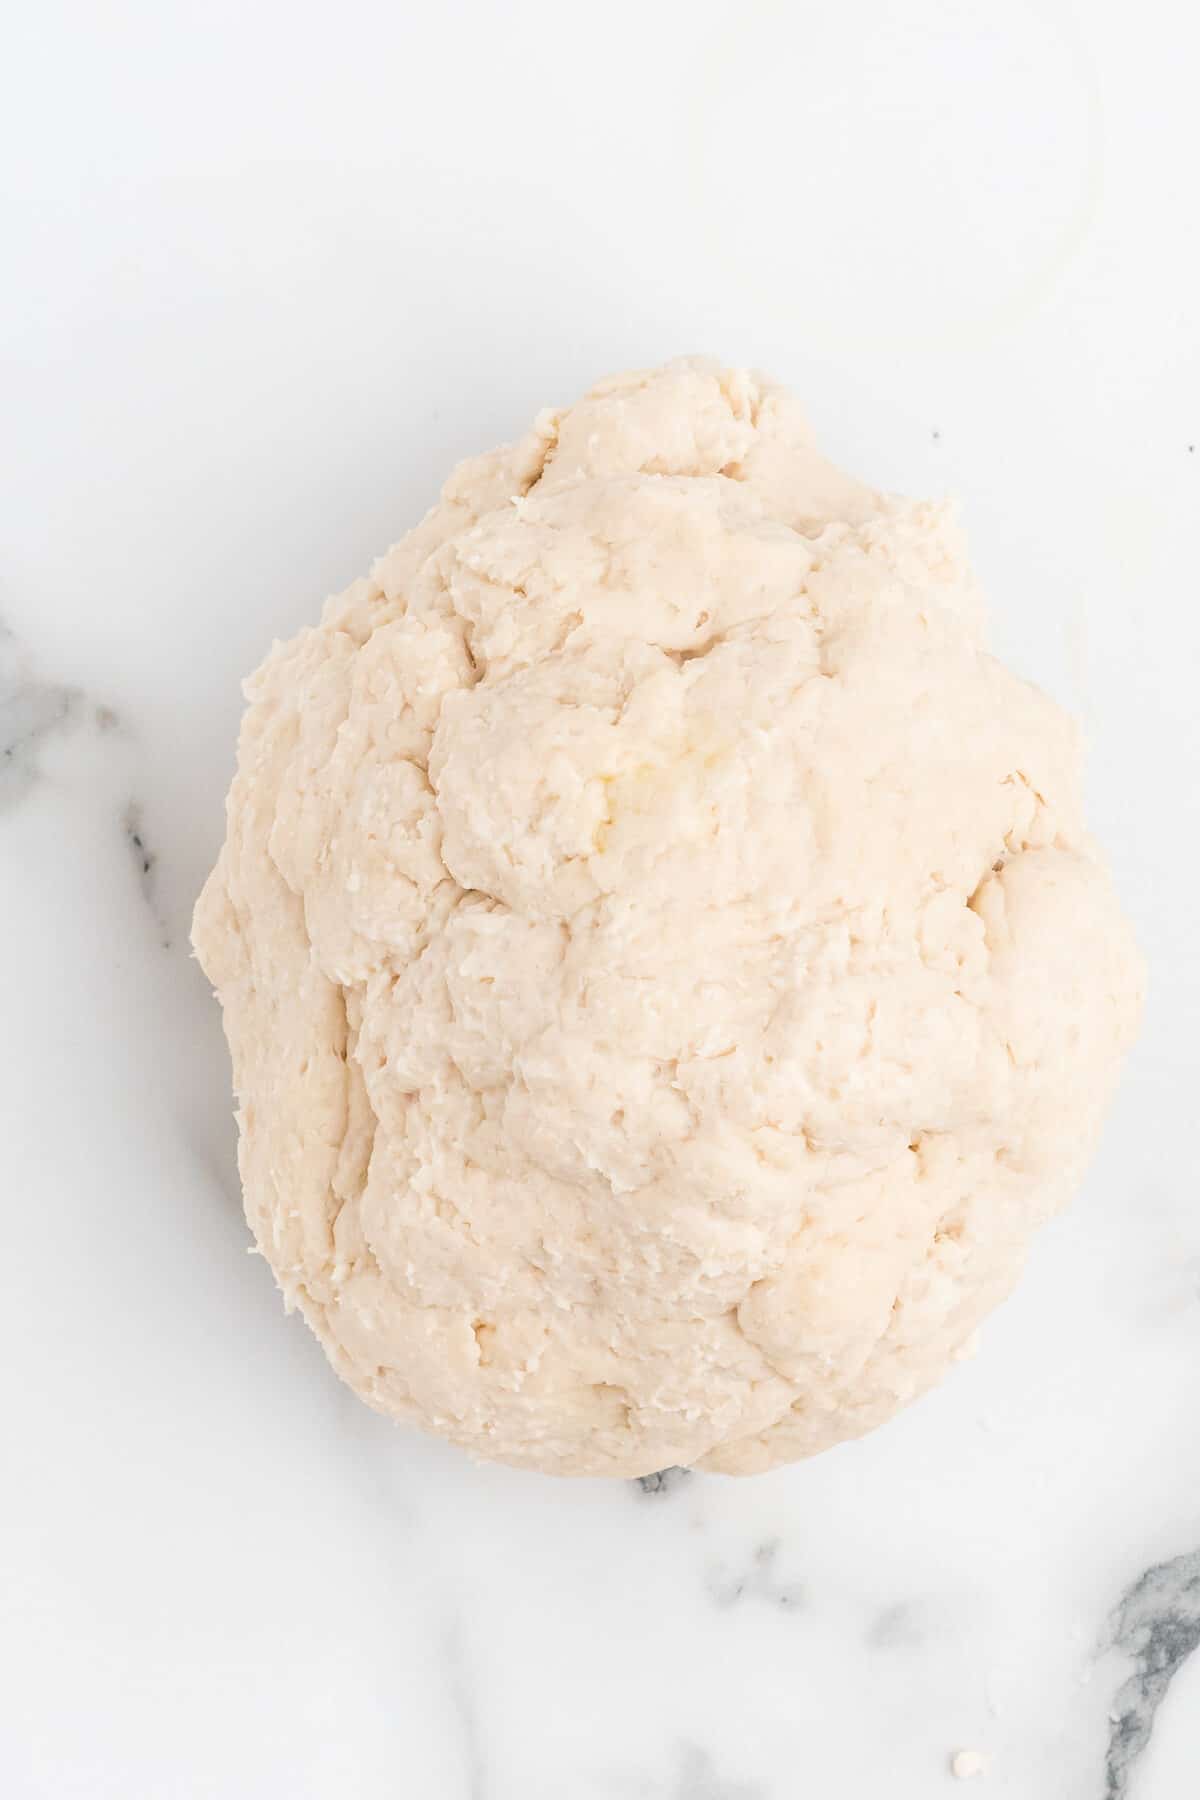 kneading the dough ball for the pizza crust.